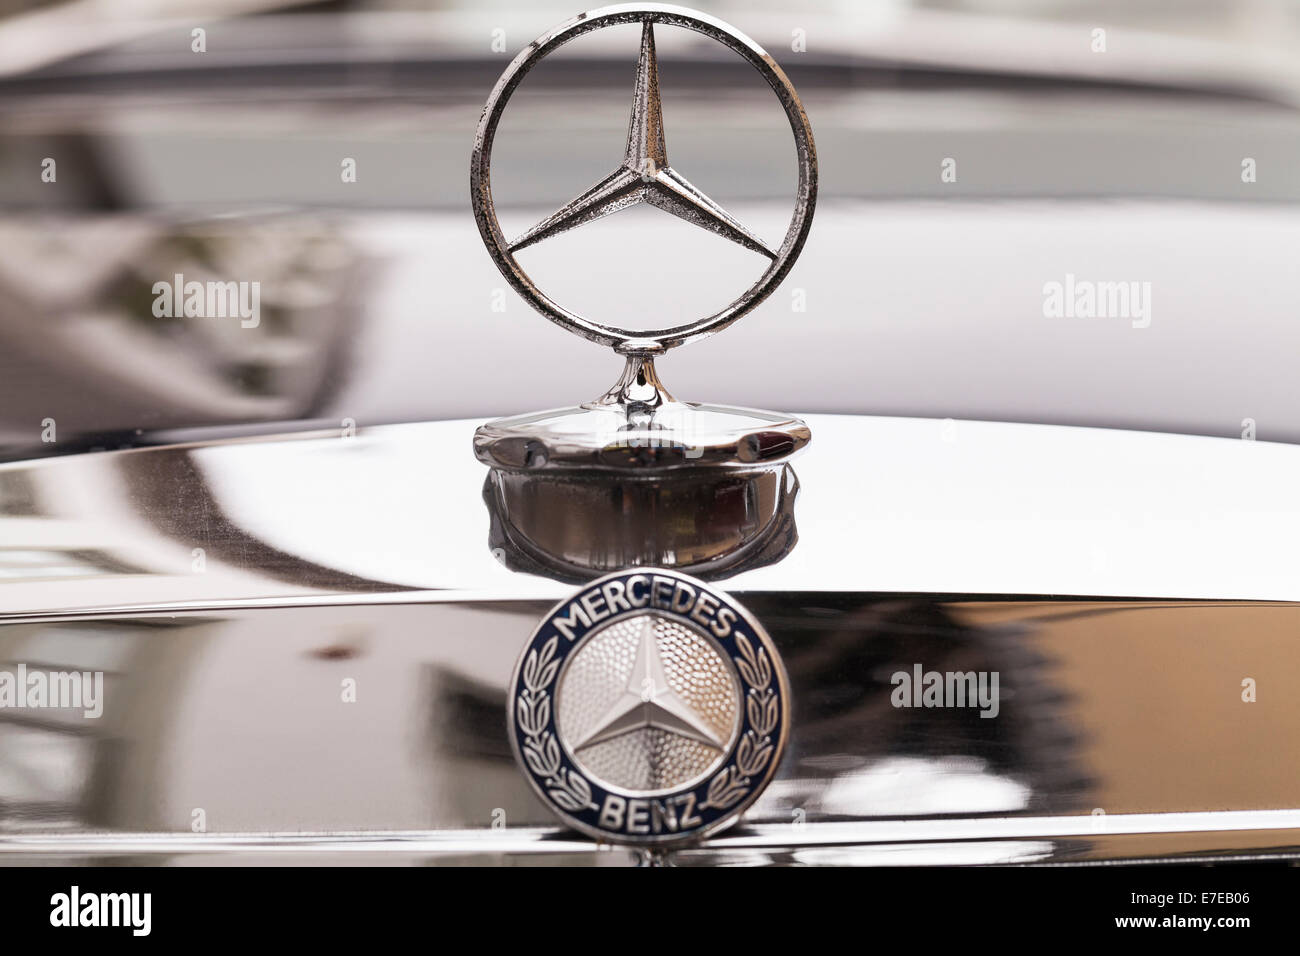 https://c8.alamy.com/comp/E7EB06/close-up-of-mercedes-benz-bonnet-badge-from-the-1970s-on-an-old-vintage-E7EB06.jpg